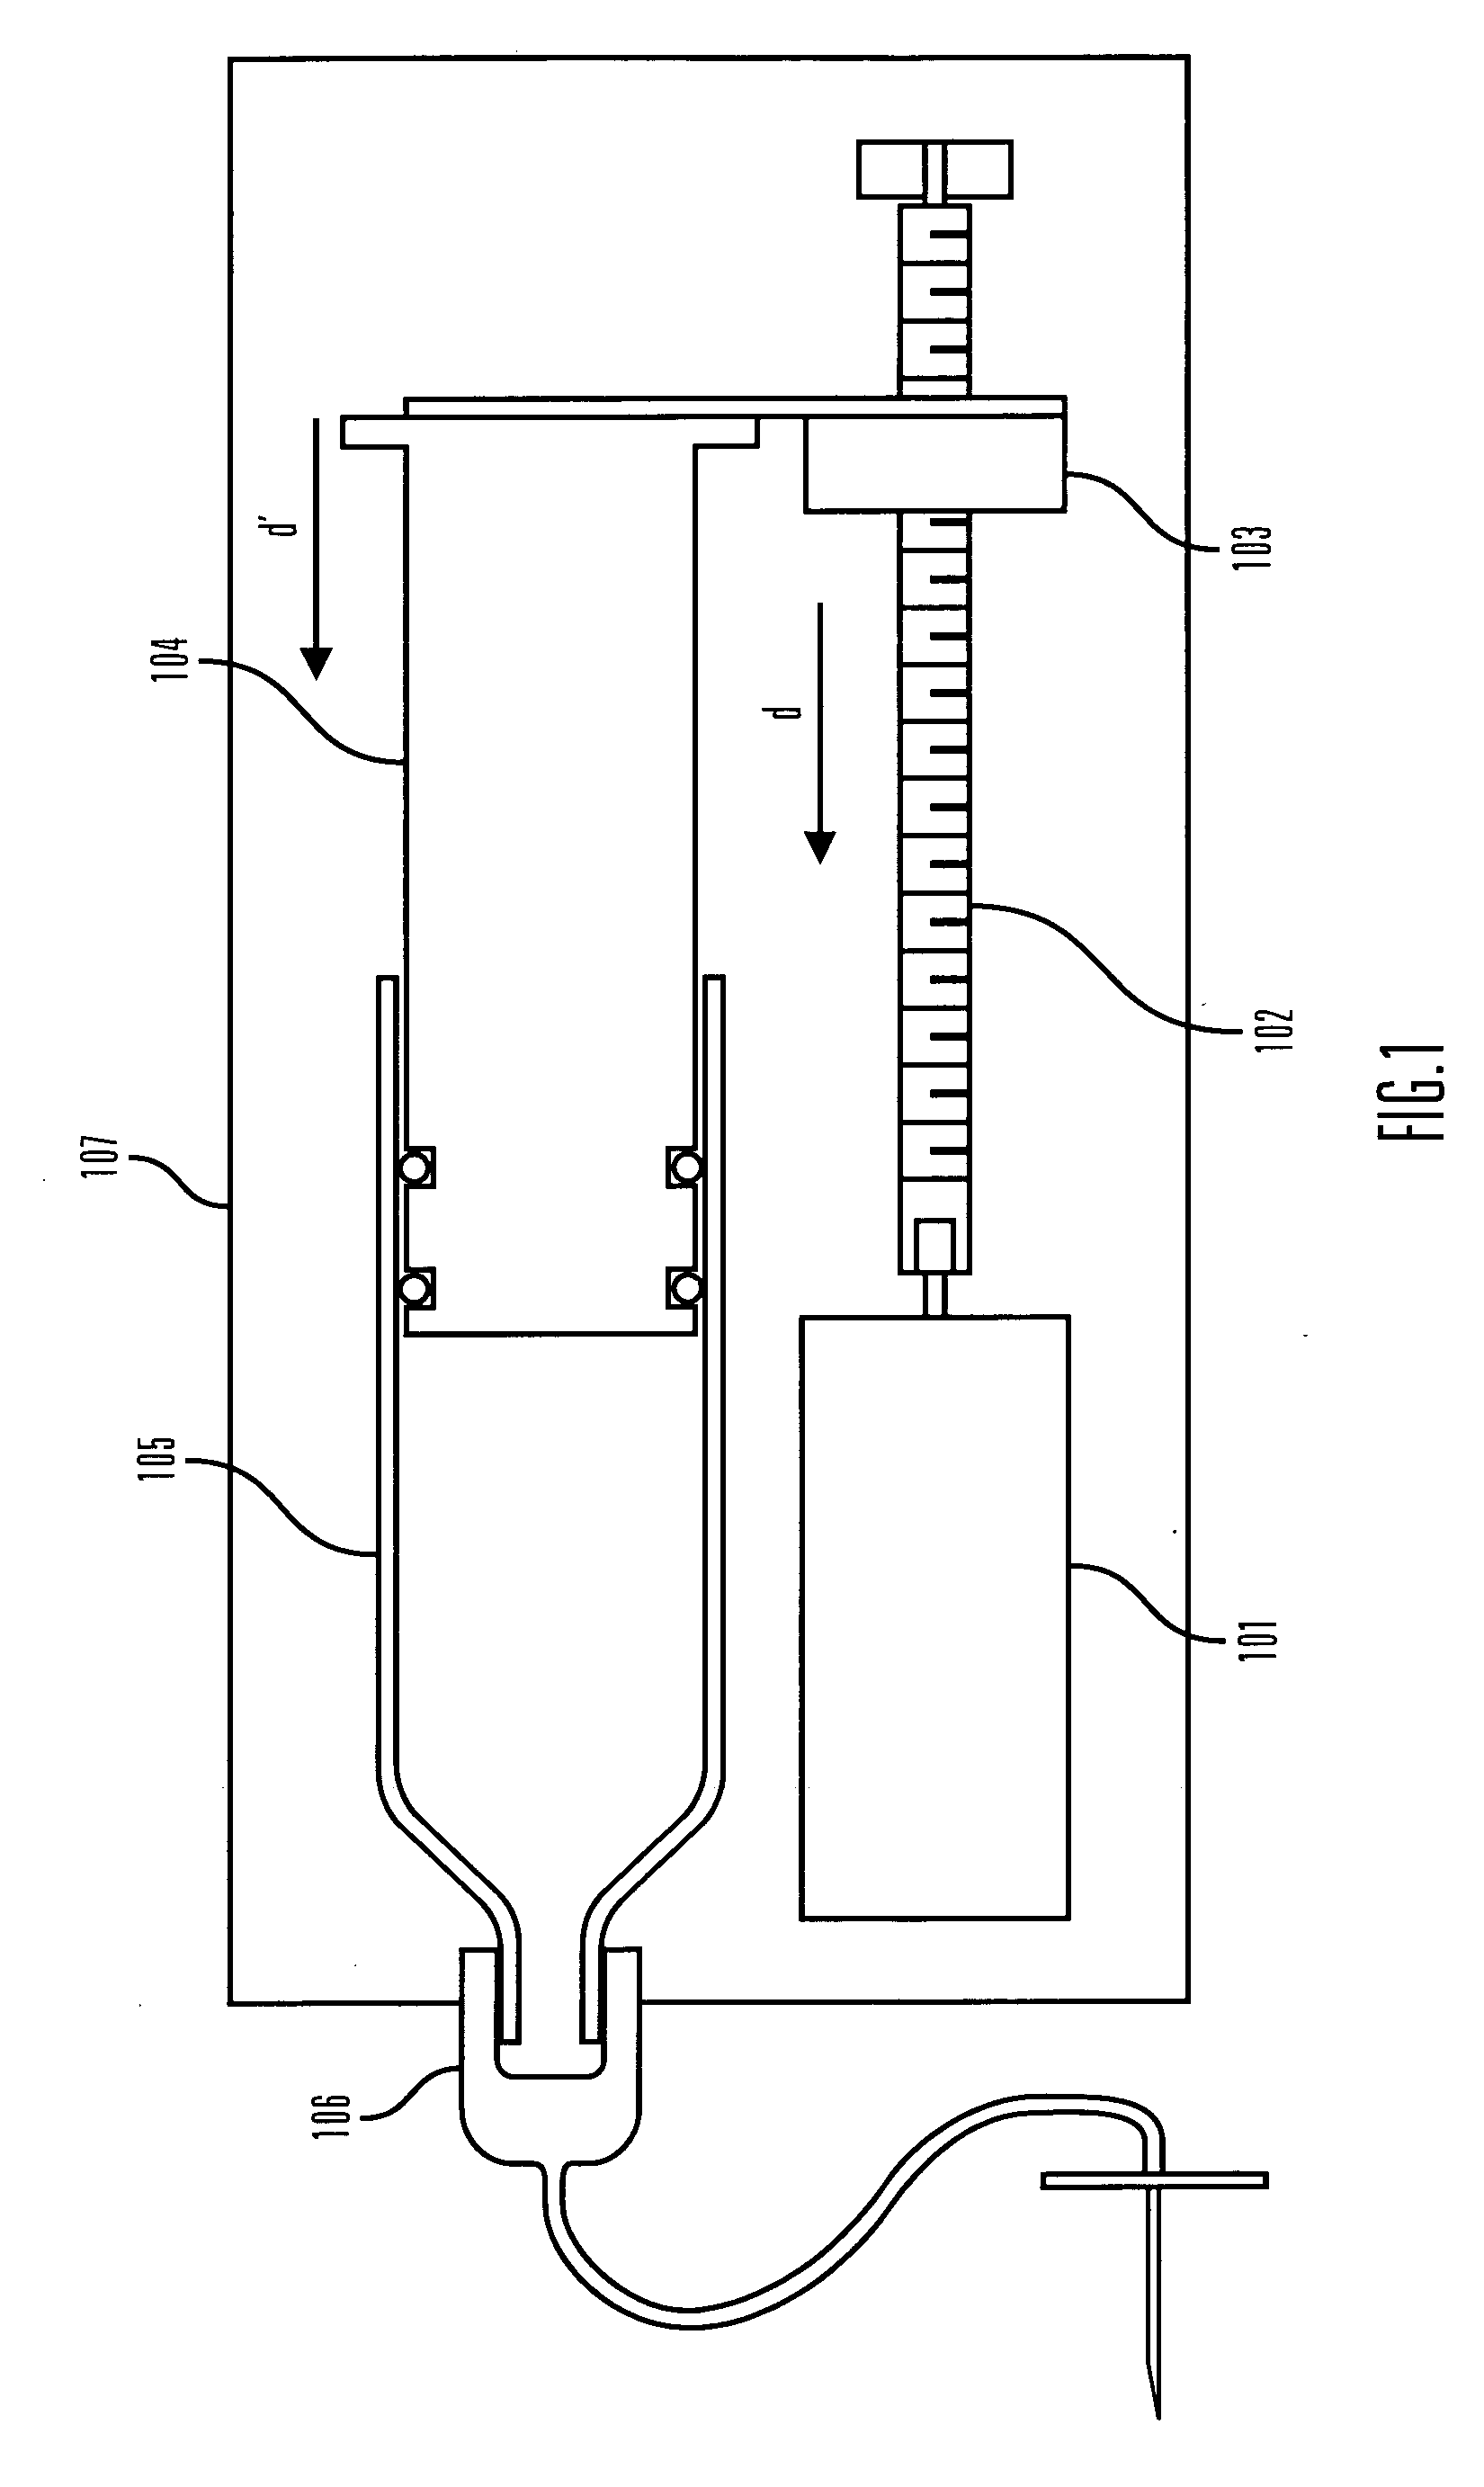 Fluid reservoir for use with an external infusion device